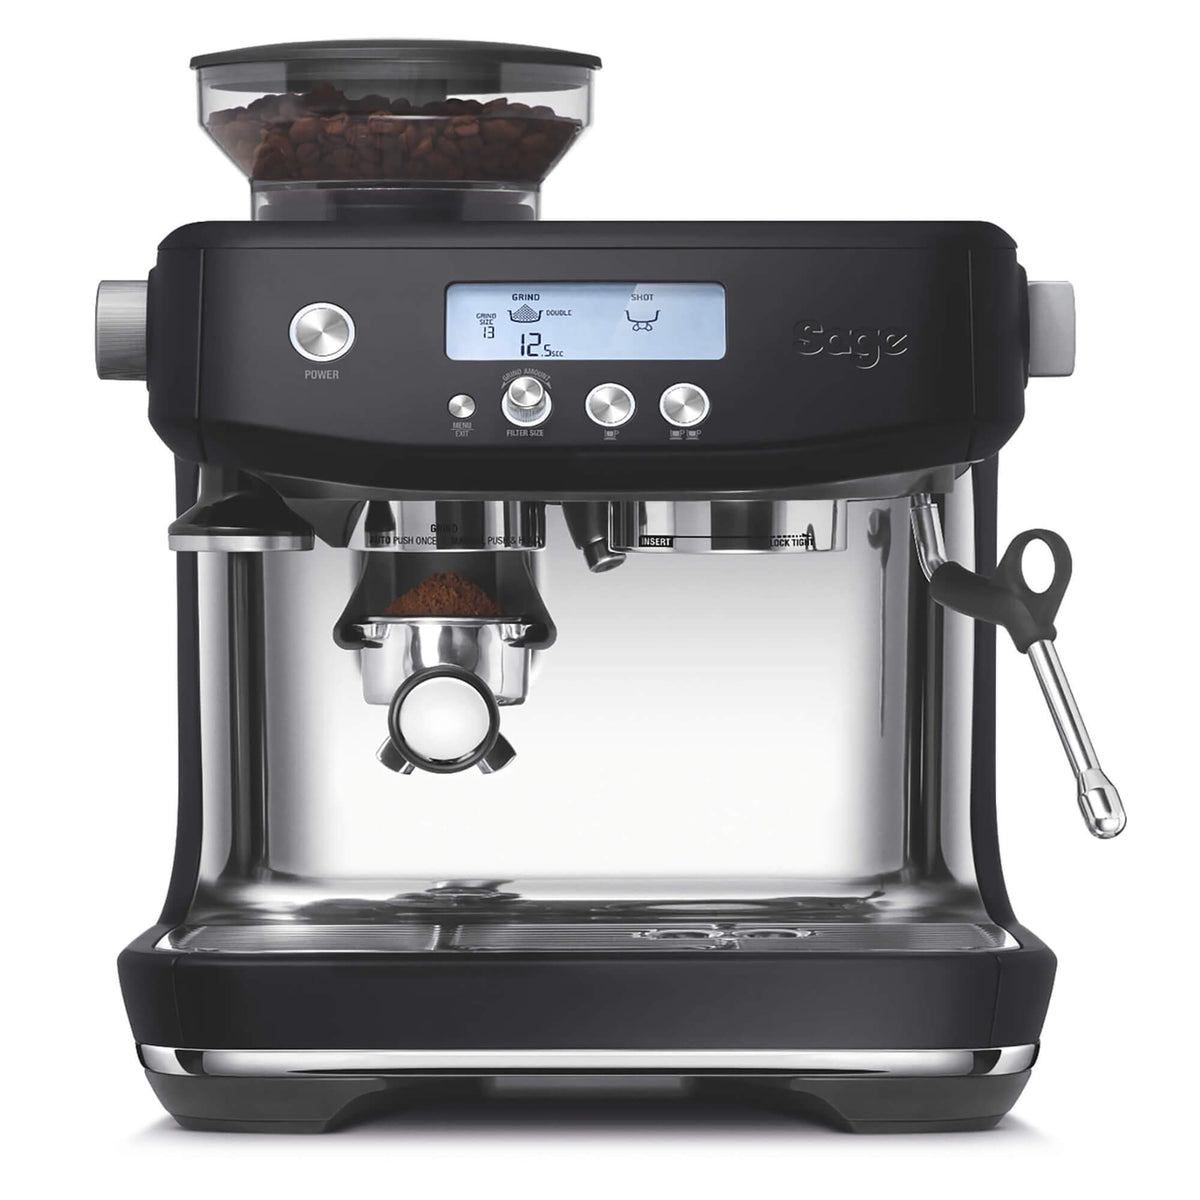 MARCO OTTOMATIC COFFEE MAKER